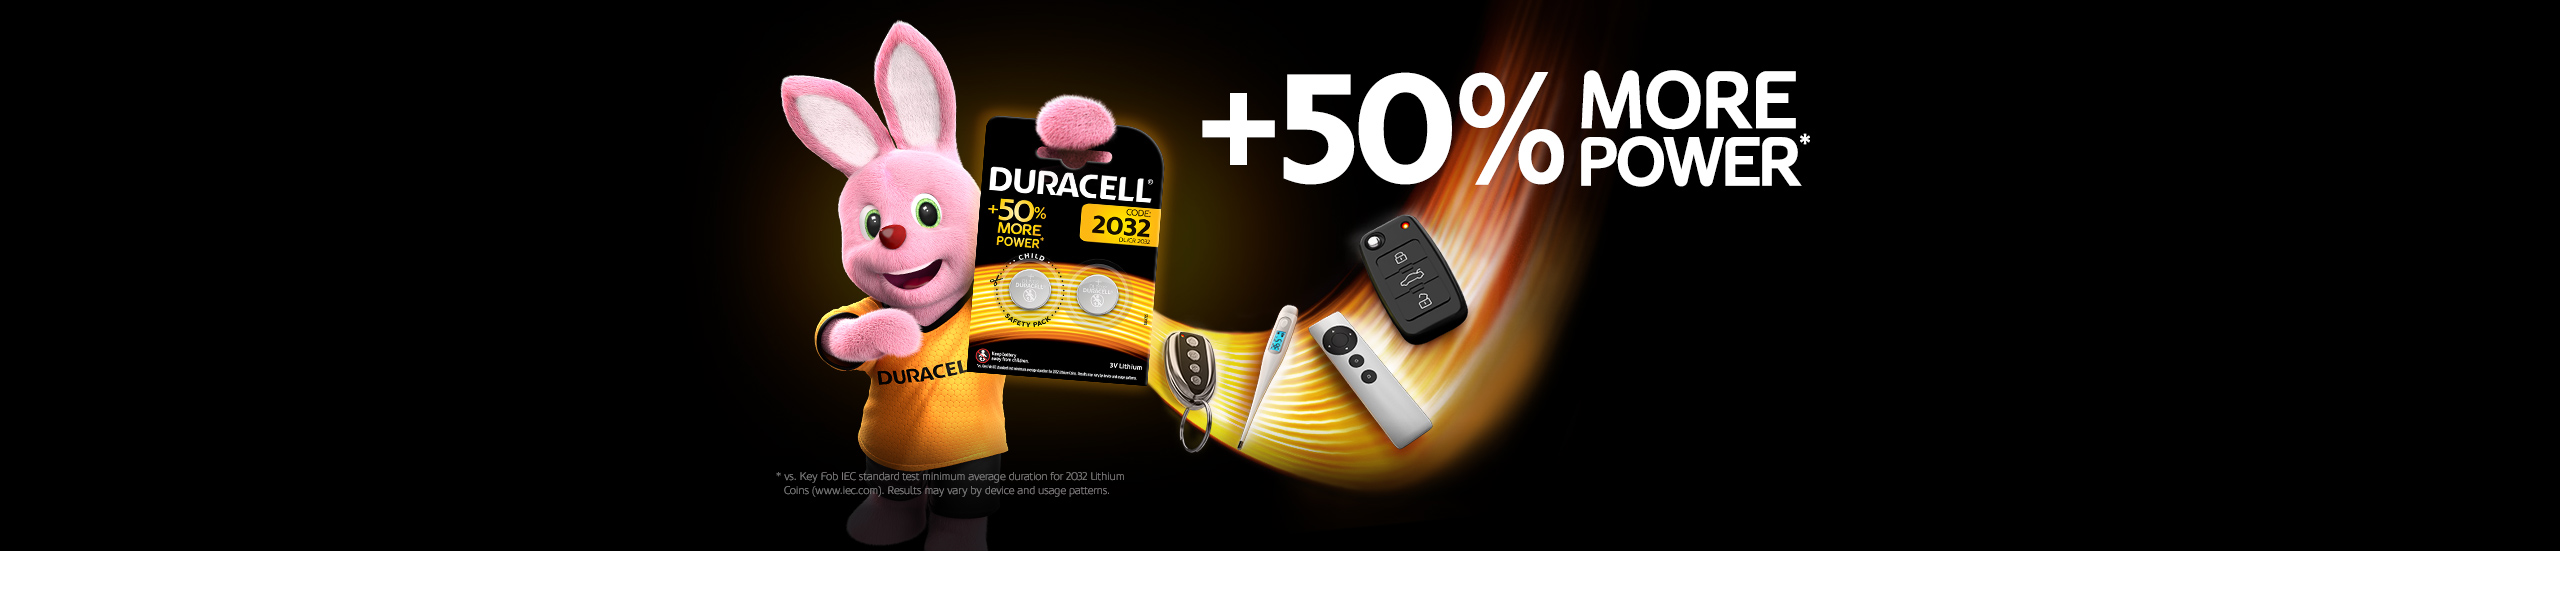 Duracell Specialty 2032 coin batteries with up to 50% more power